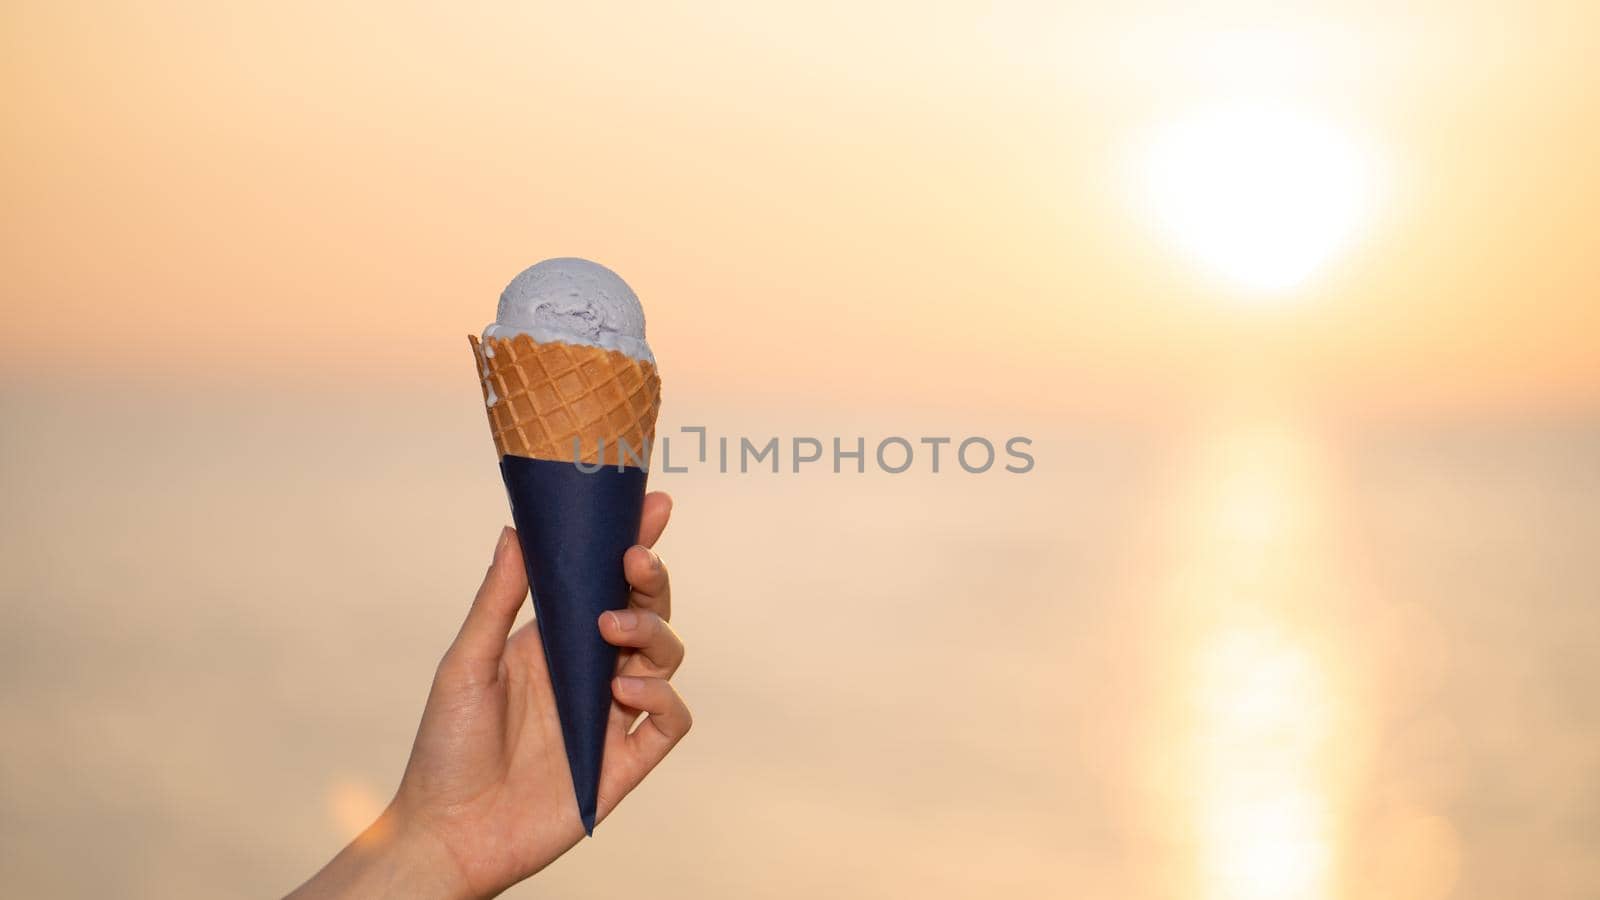 Scoop ice cream with a waffle cone in hand on the beach, sunset moment. by sirawit99